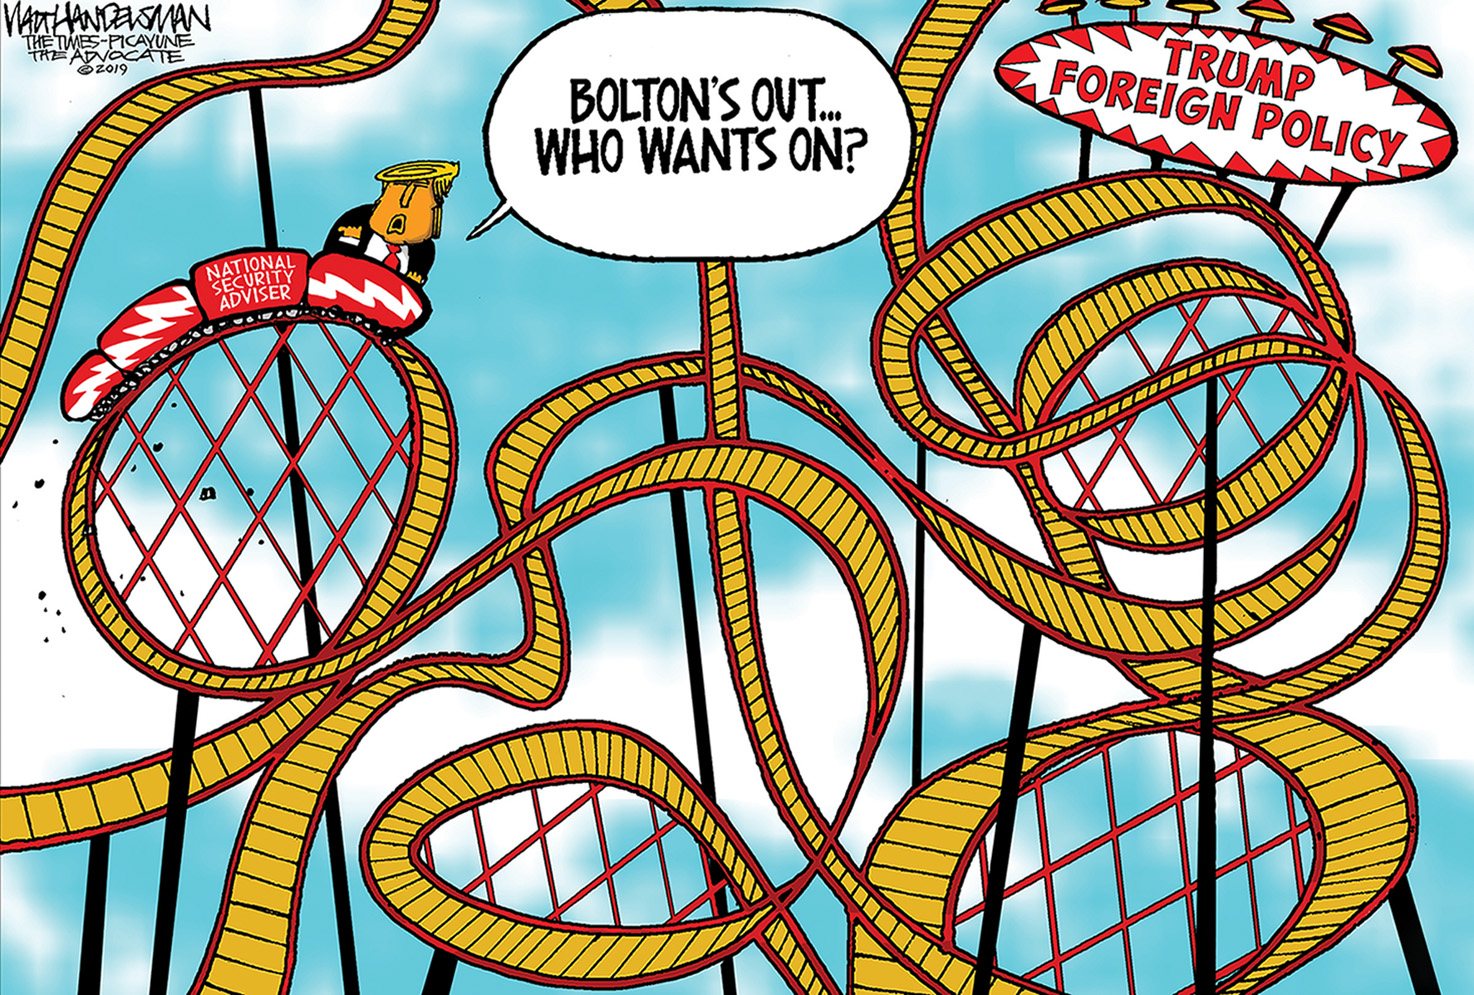 Political Cartoon U.S. Trump Foreign Policy Bolton Out Rollercoaster